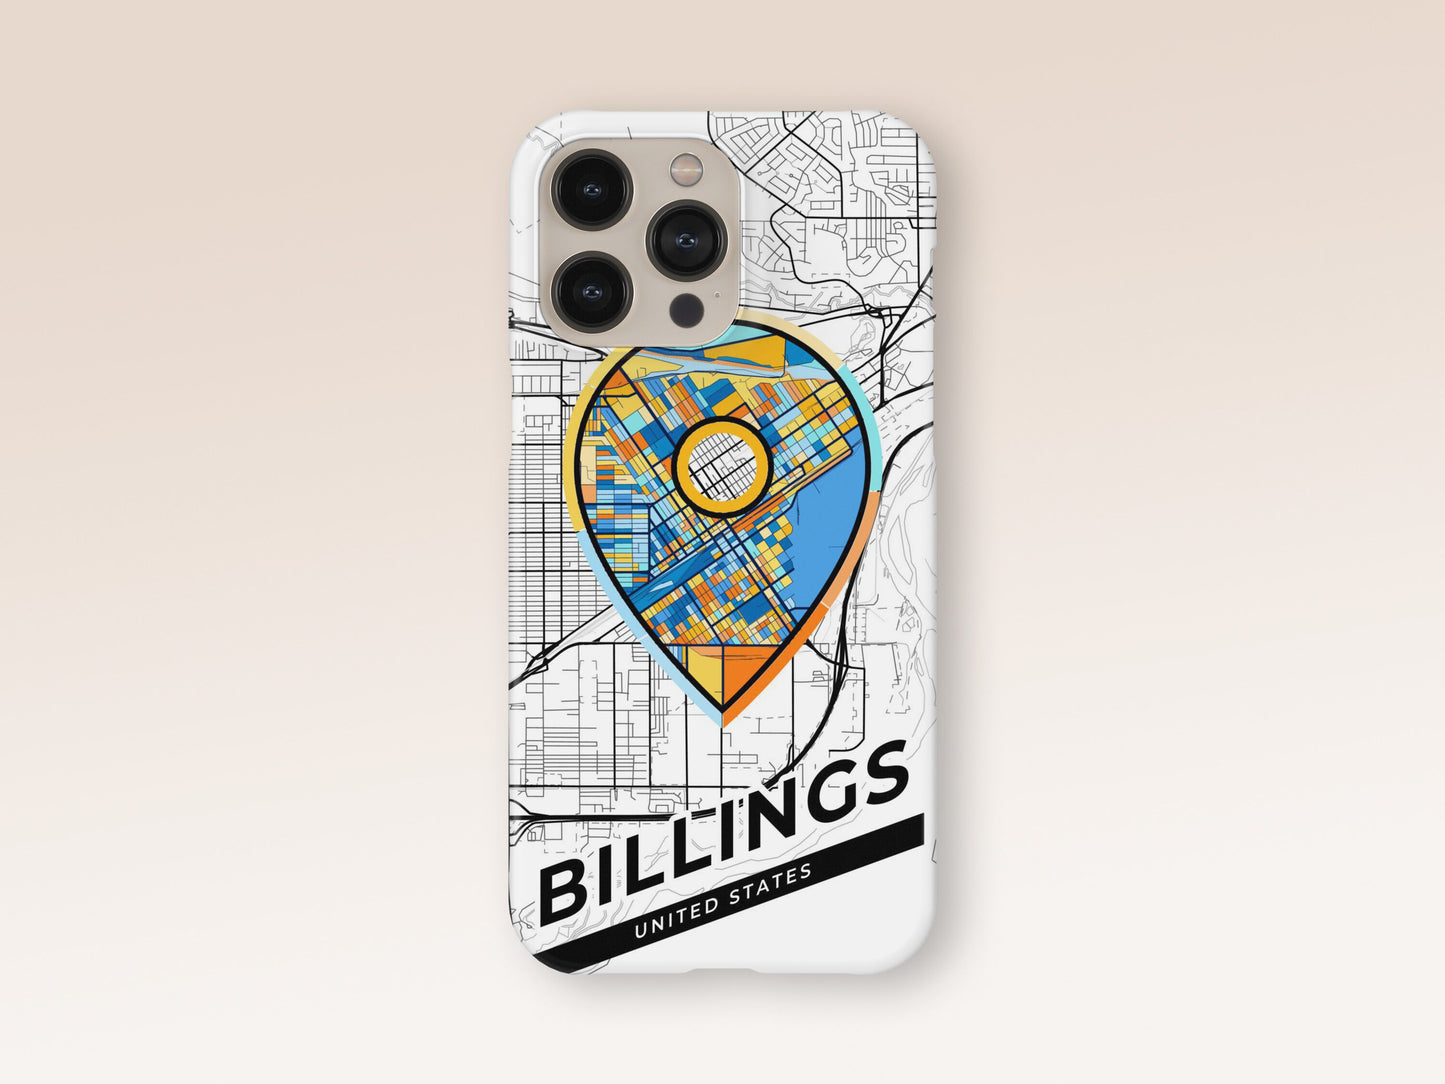 Billings Montana slim phone case with colorful icon. Birthday, wedding or housewarming gift. Couple match cases. 1